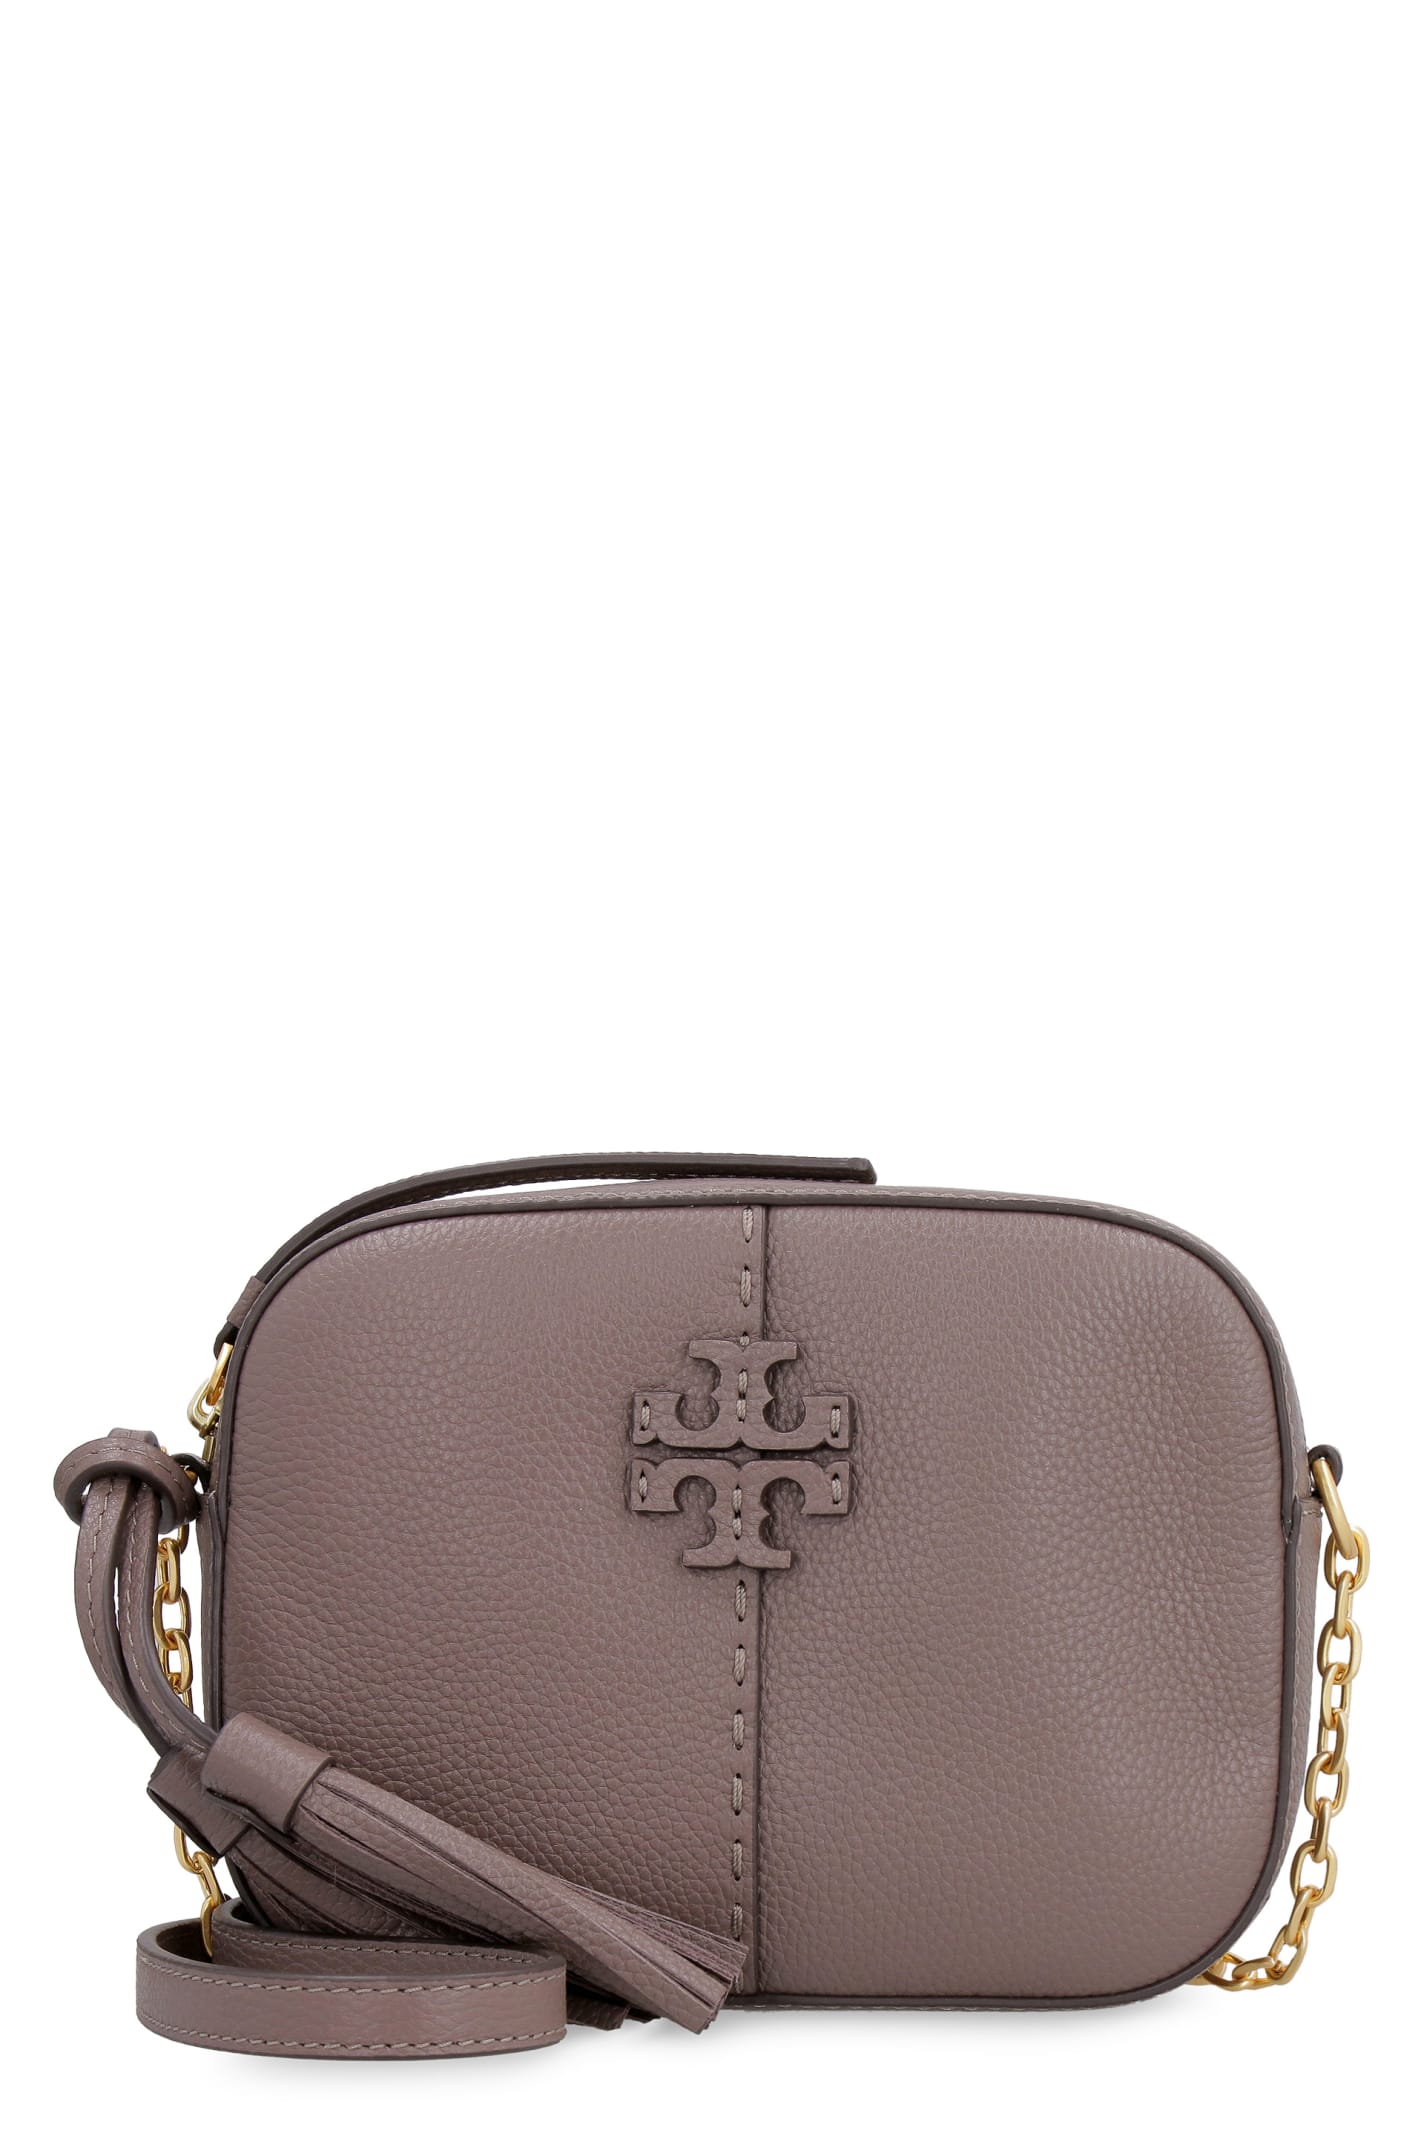 Tory Burch Mcgraw Leather Camera Bag from Tory Burch | AccuWeather Shop